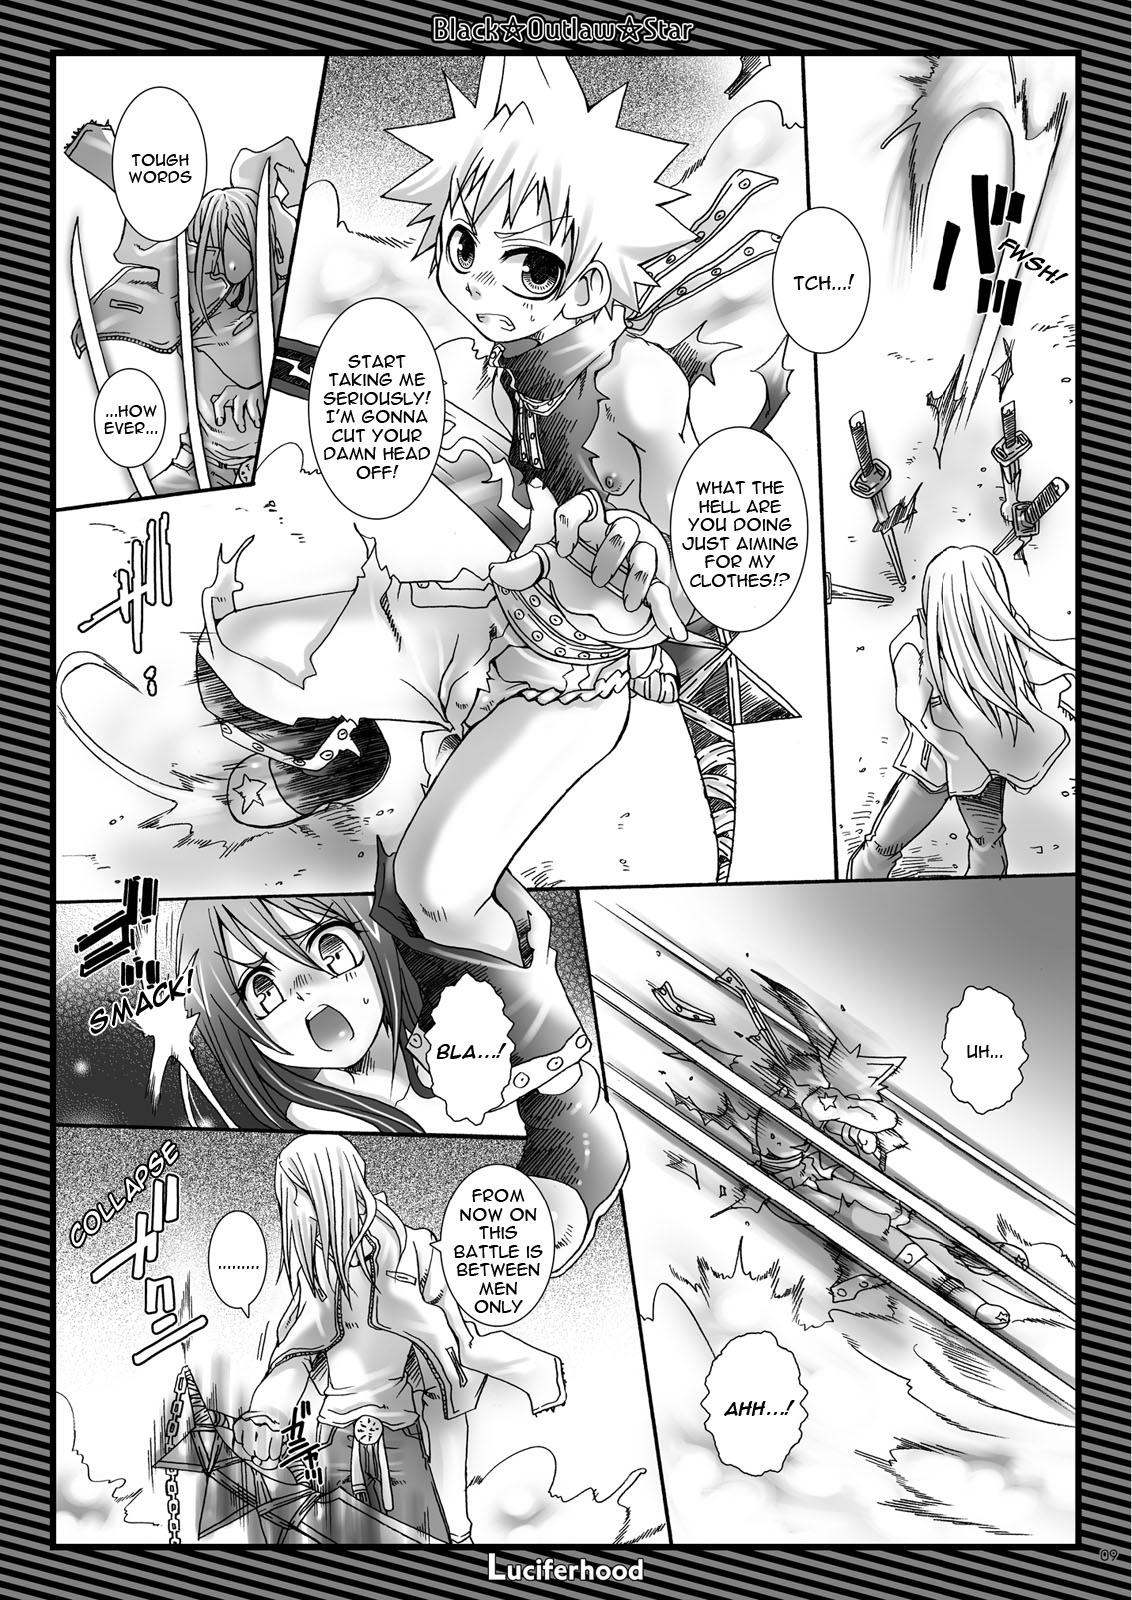 Hardcorend Black Outlaw Star - Soul eater Time - Page 7